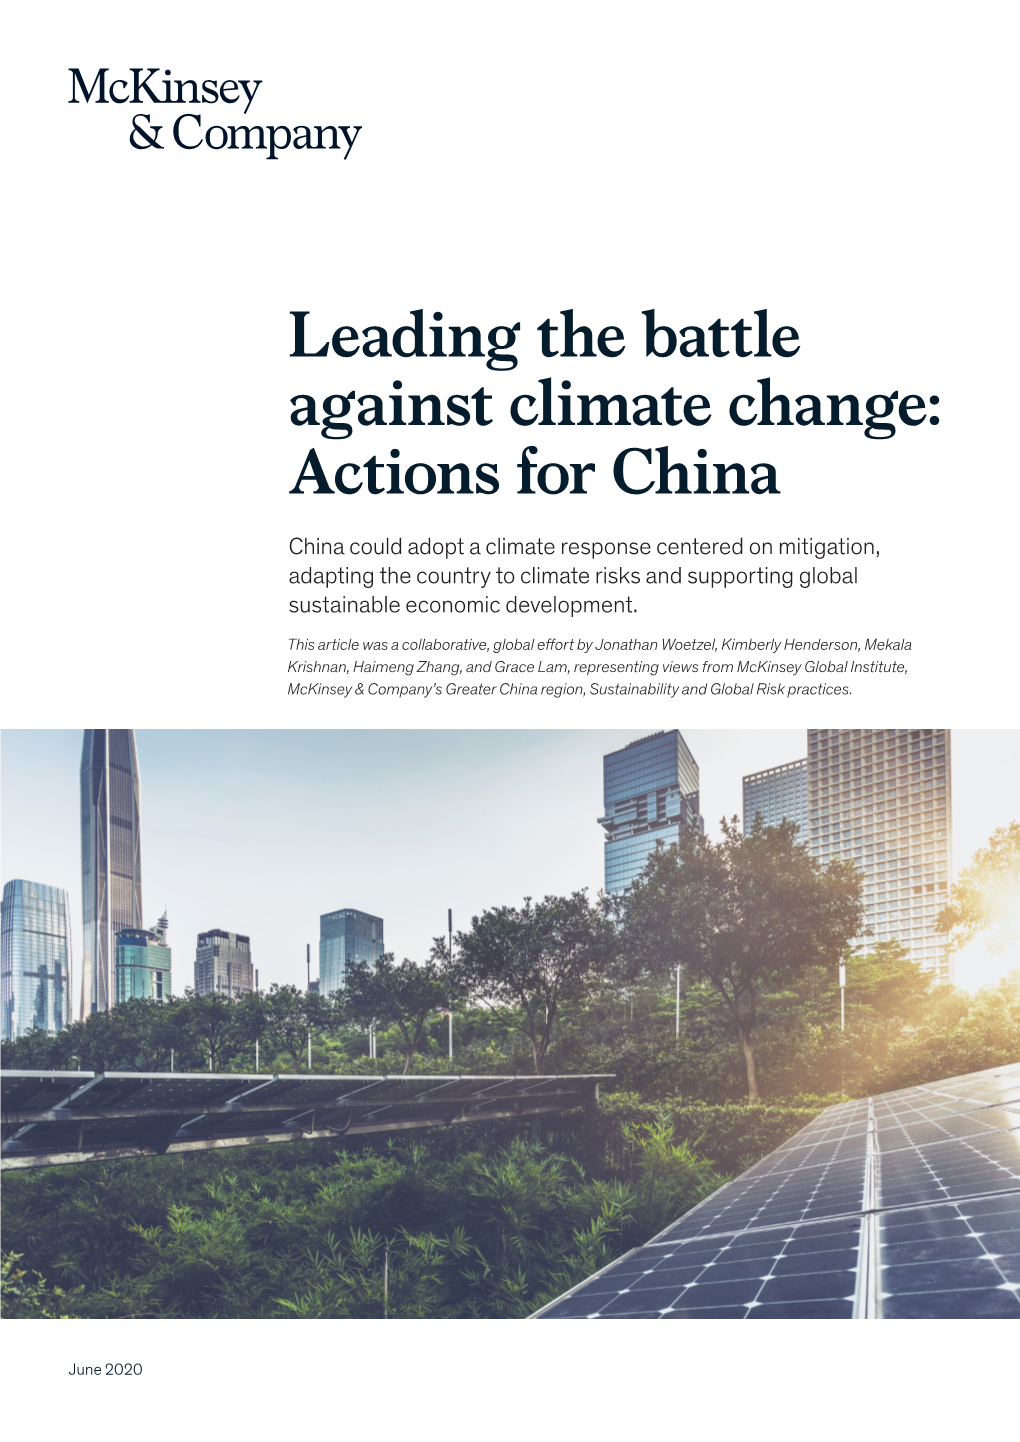 Leading the Battle Against Climate Change: Actions for China